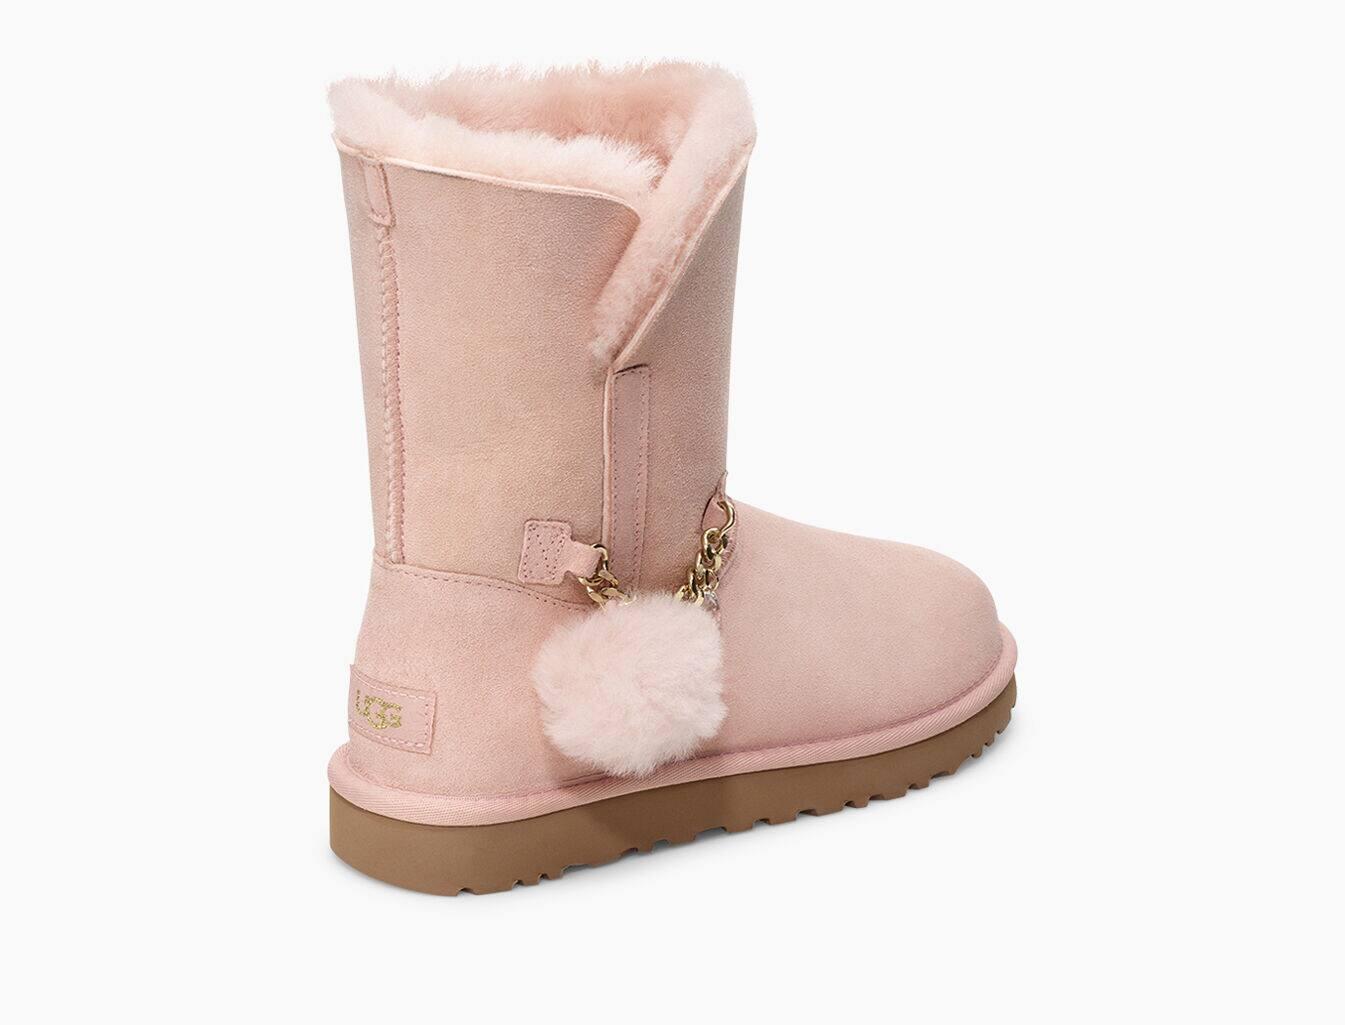 UGG Suede Classic Mini Charms Booties in Pink - Lyst